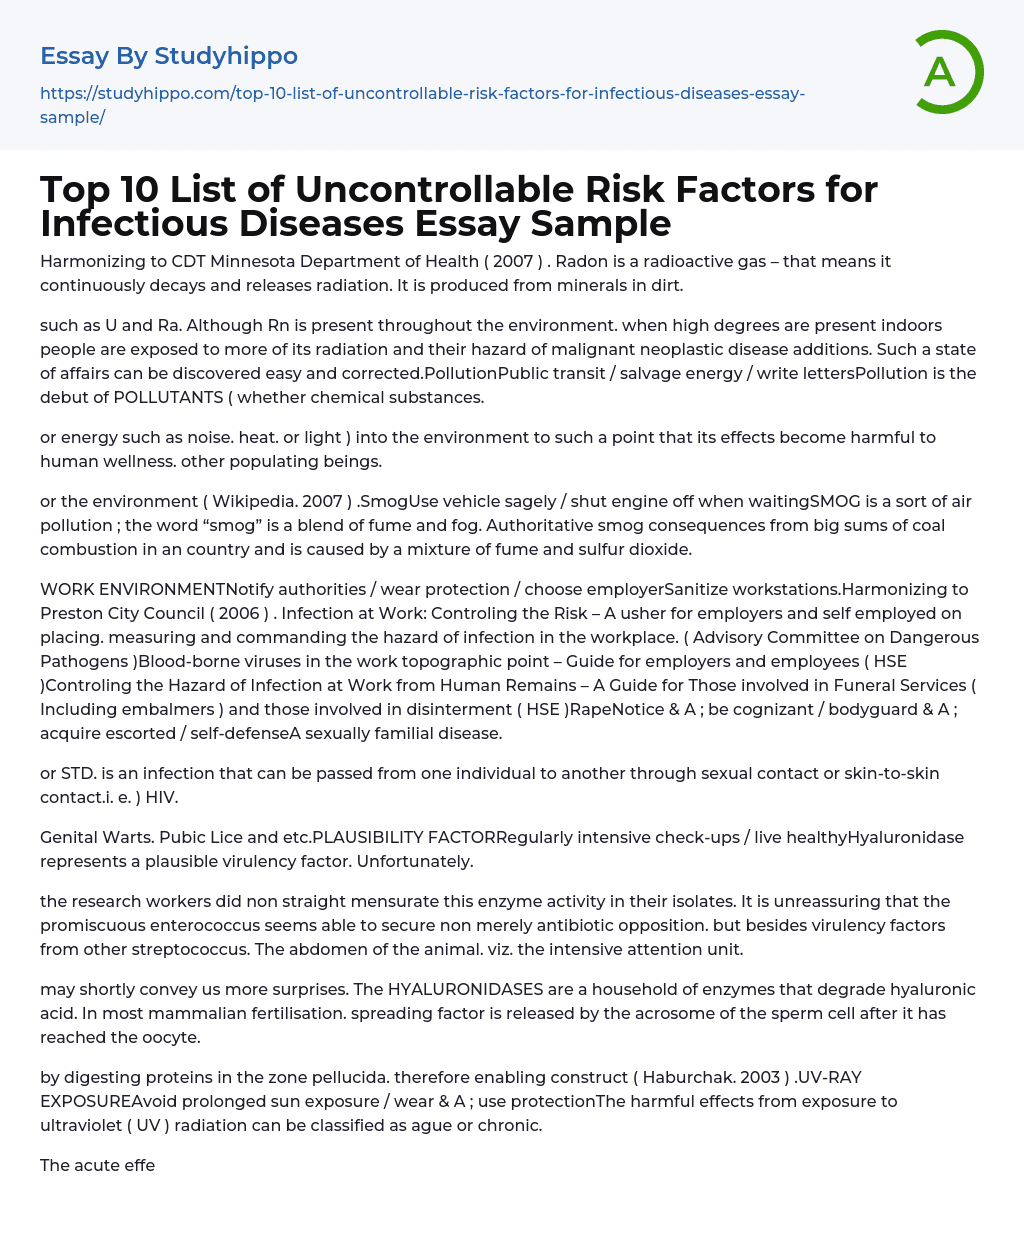 Top 10 List of Uncontrollable Risk Factors for Infectious Diseases Essay Sample